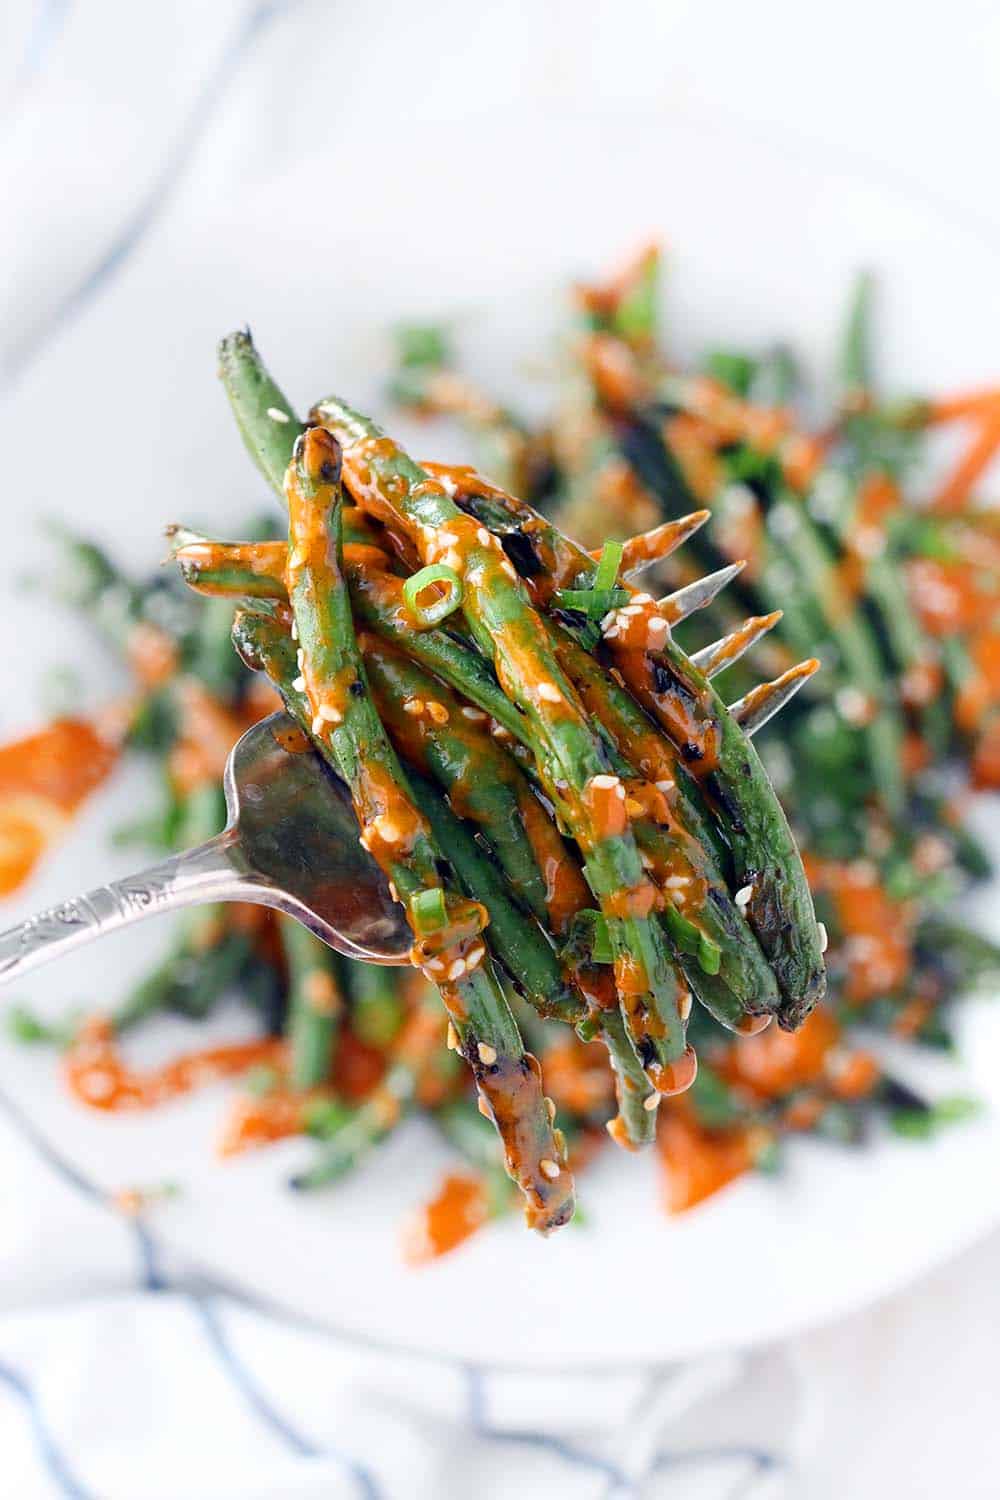 These grilled green beans are covered in spicy gochujang mayo with soy sauce and toasted sesame oil. This is the perfect low carb side dish, and they leftover mayo is amazing on sandwiches or on eggs! No grill? The beans can be sautéed or roasted as an alternative, and sriracha can be used as a substitute for gochujang.